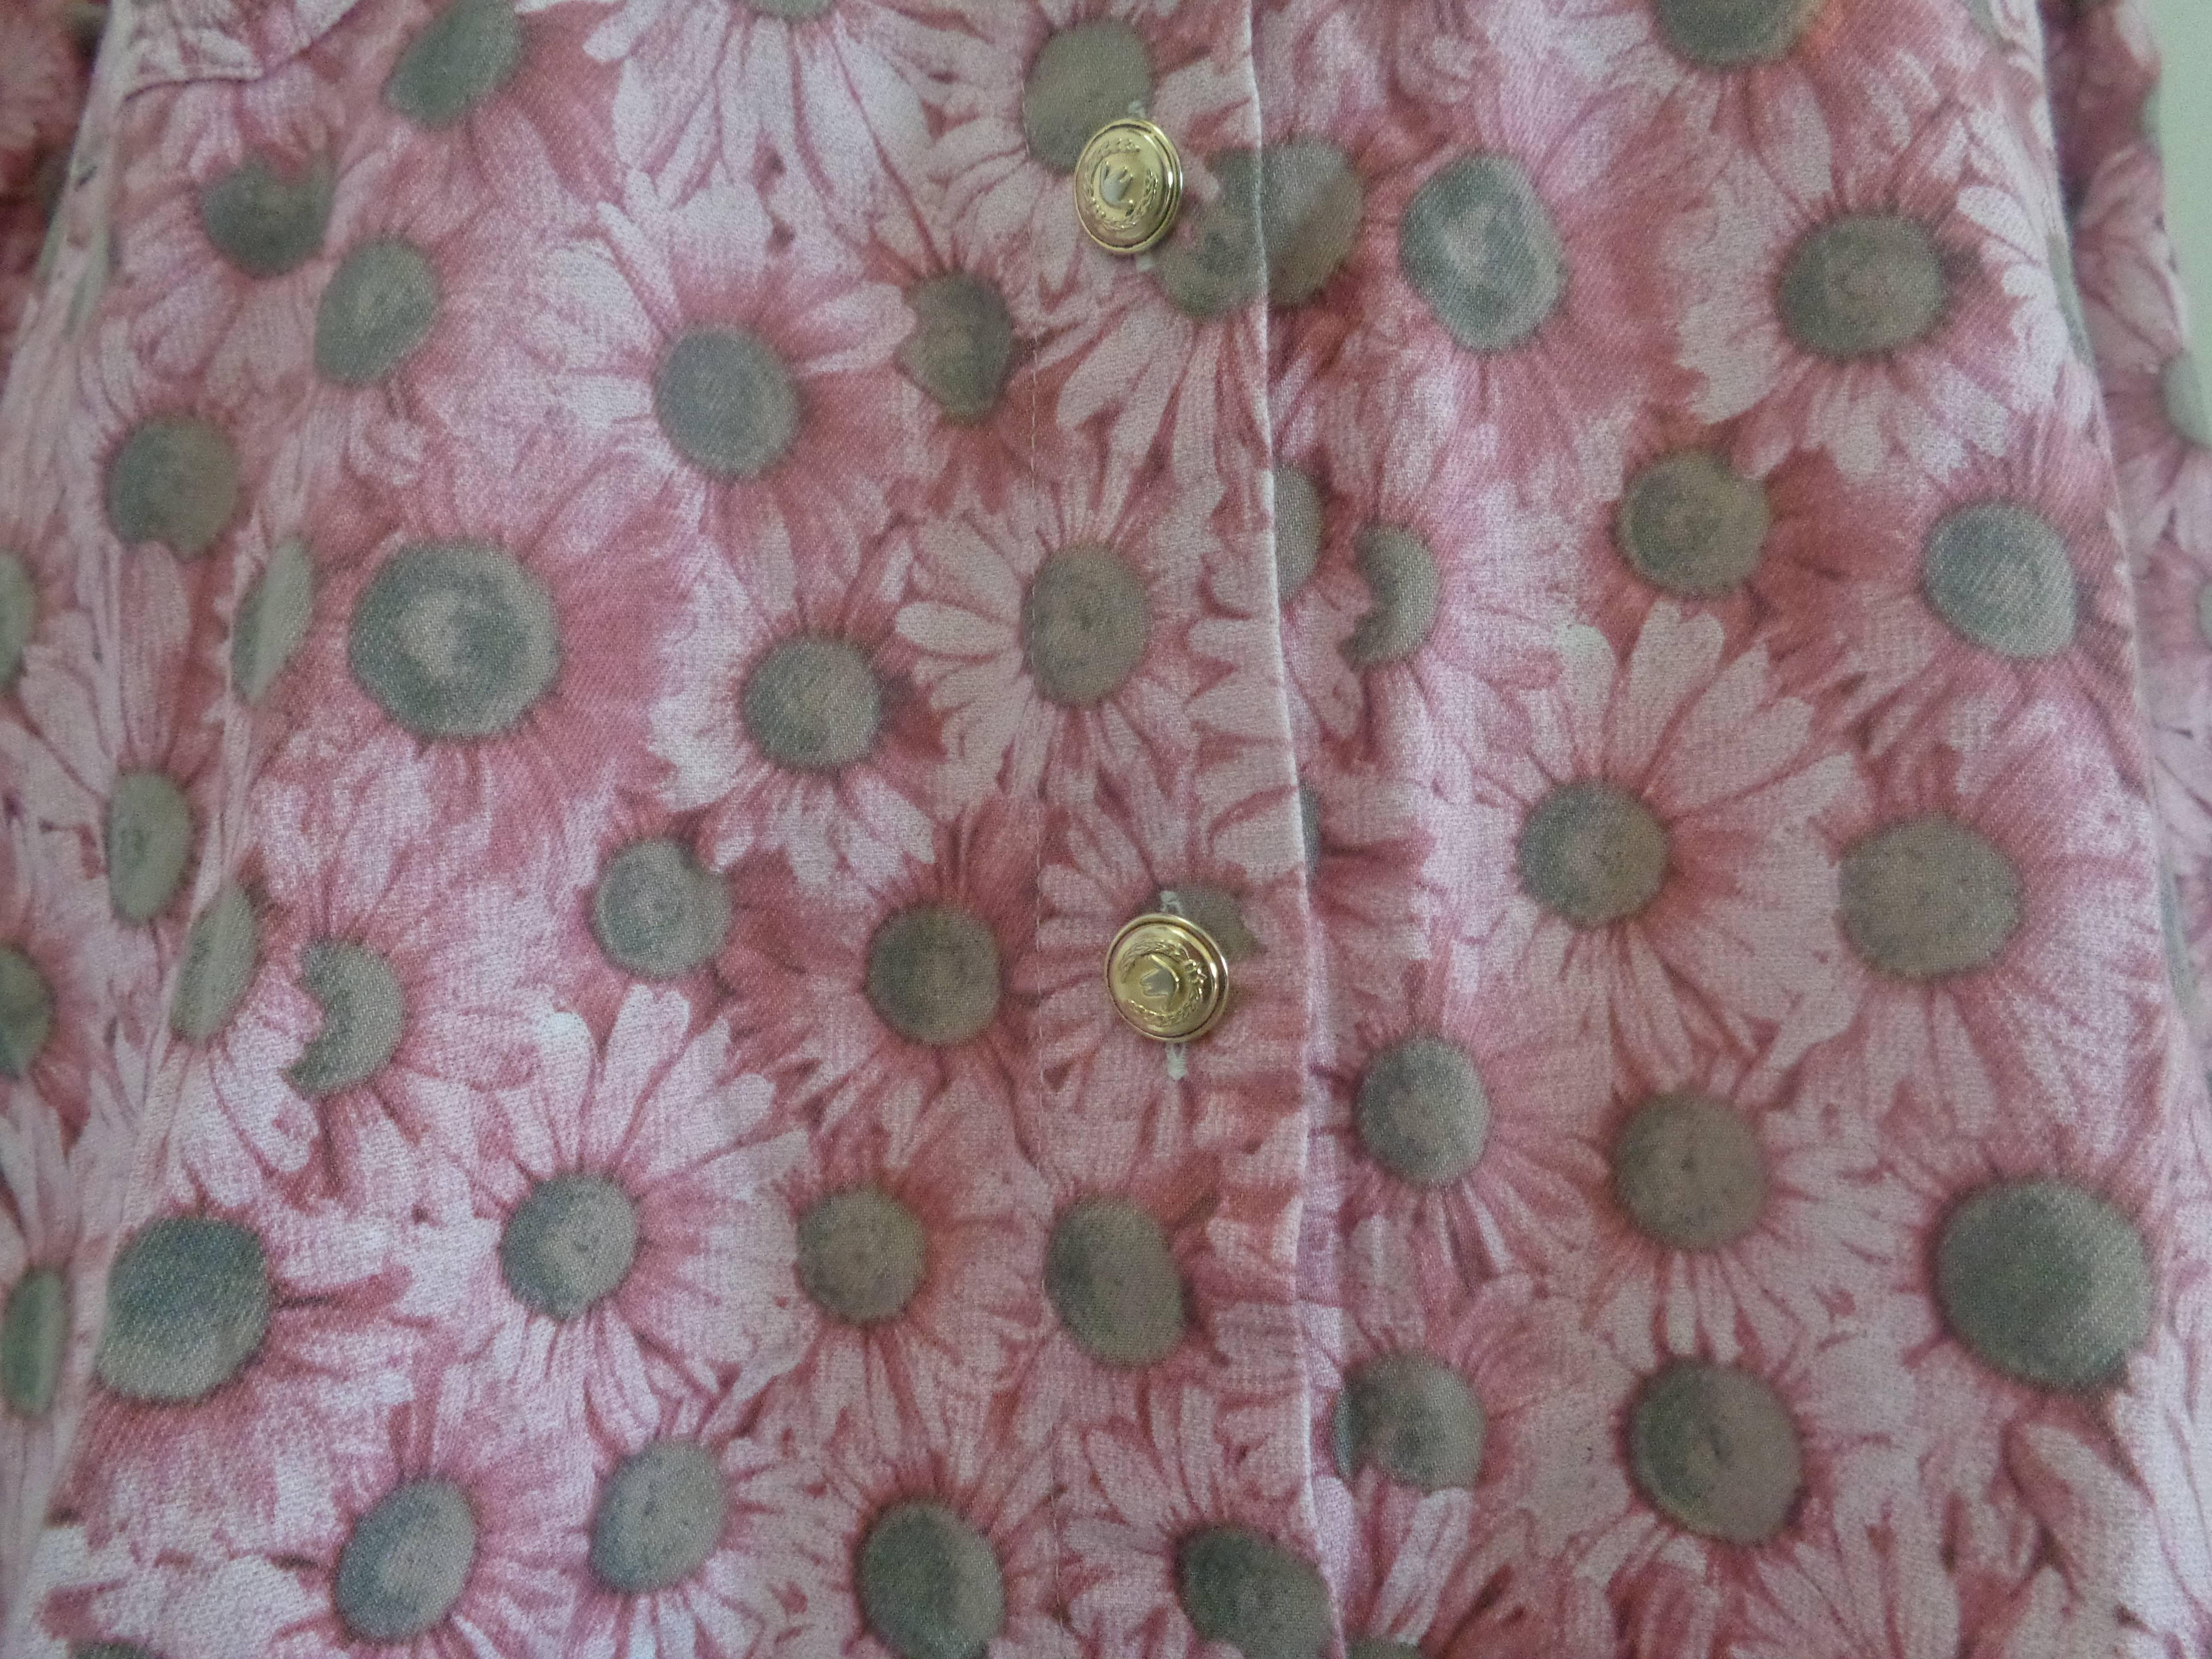 Moschino Pink Flower Cotton Shirt
Totally made in italy in size S 